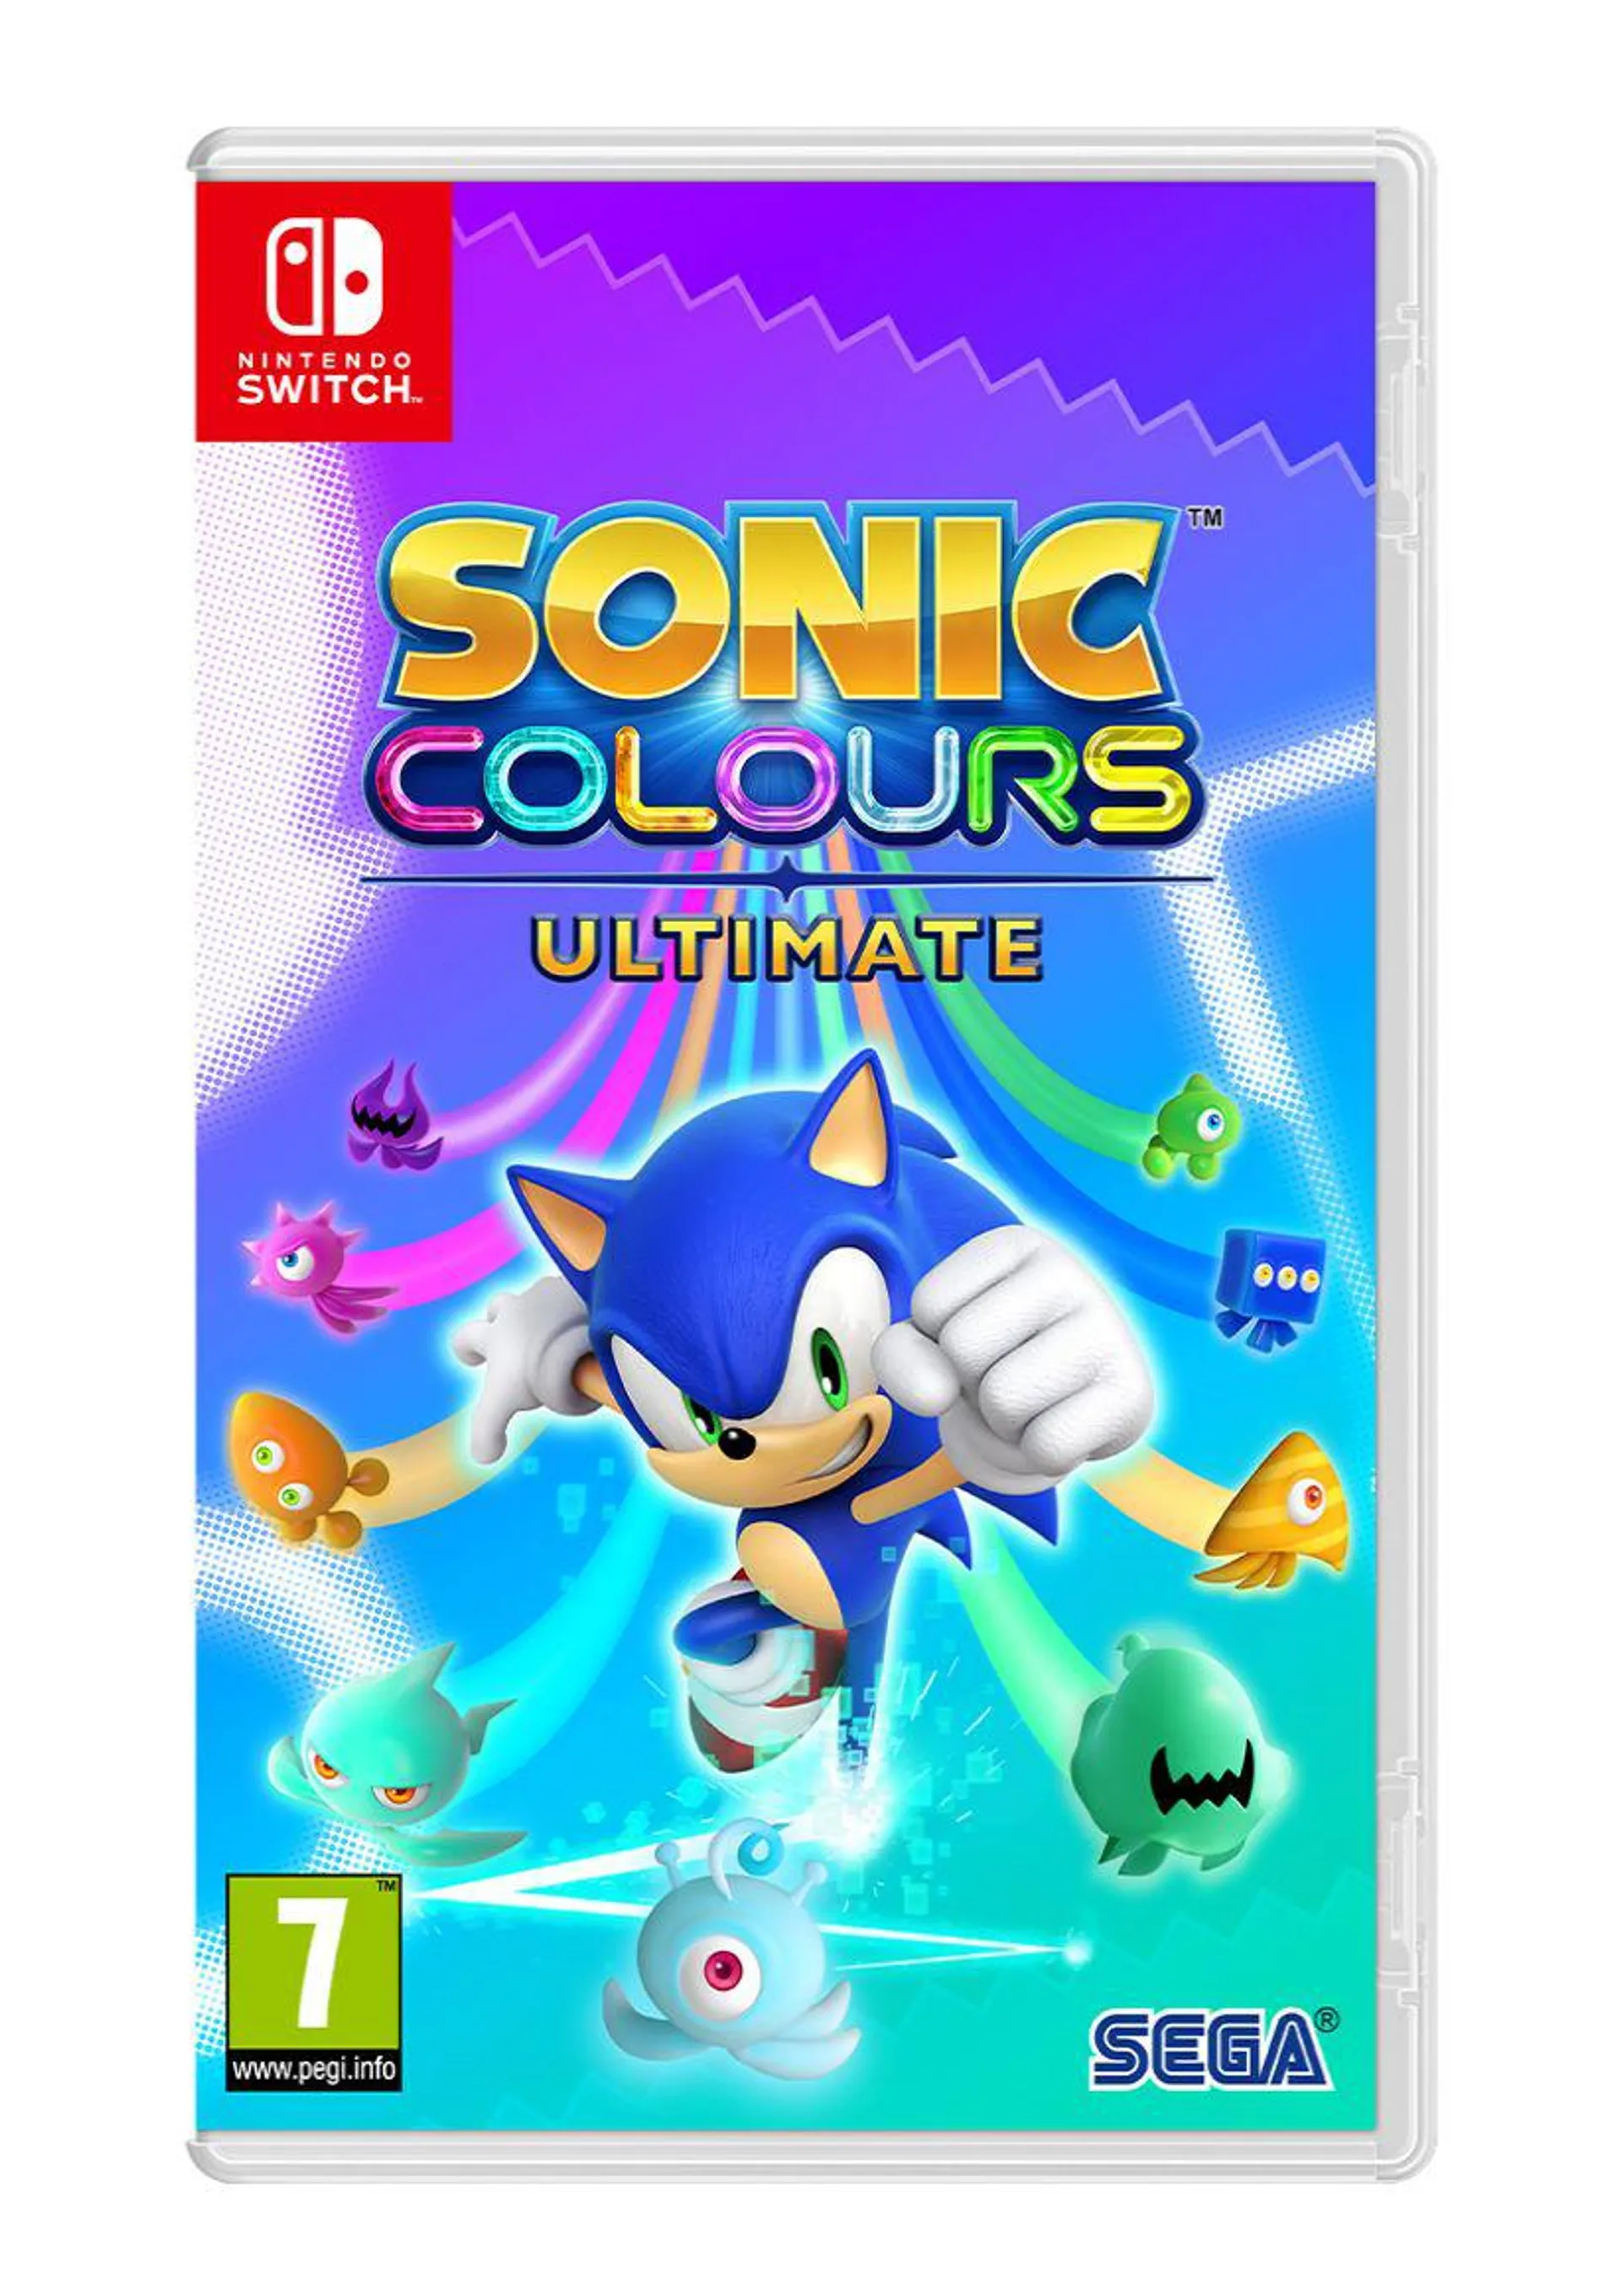 Sonic Colours Ultimate on Nintendo Switch